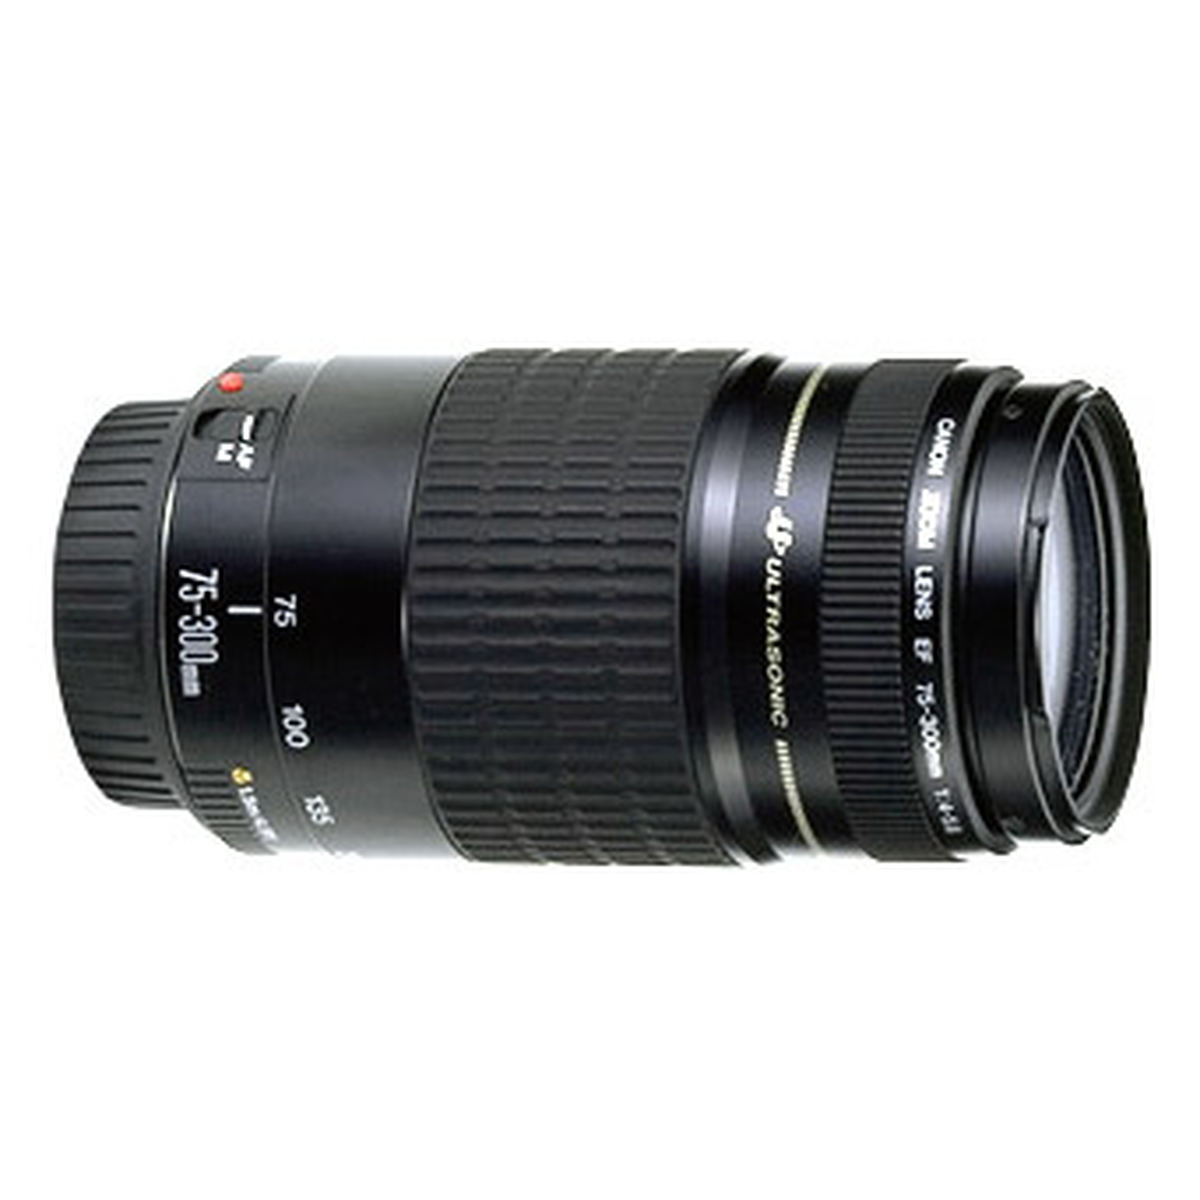 Canon EF 75-300mm f/4-5.6 USM : Specifications and Opinions | JuzaPhoto